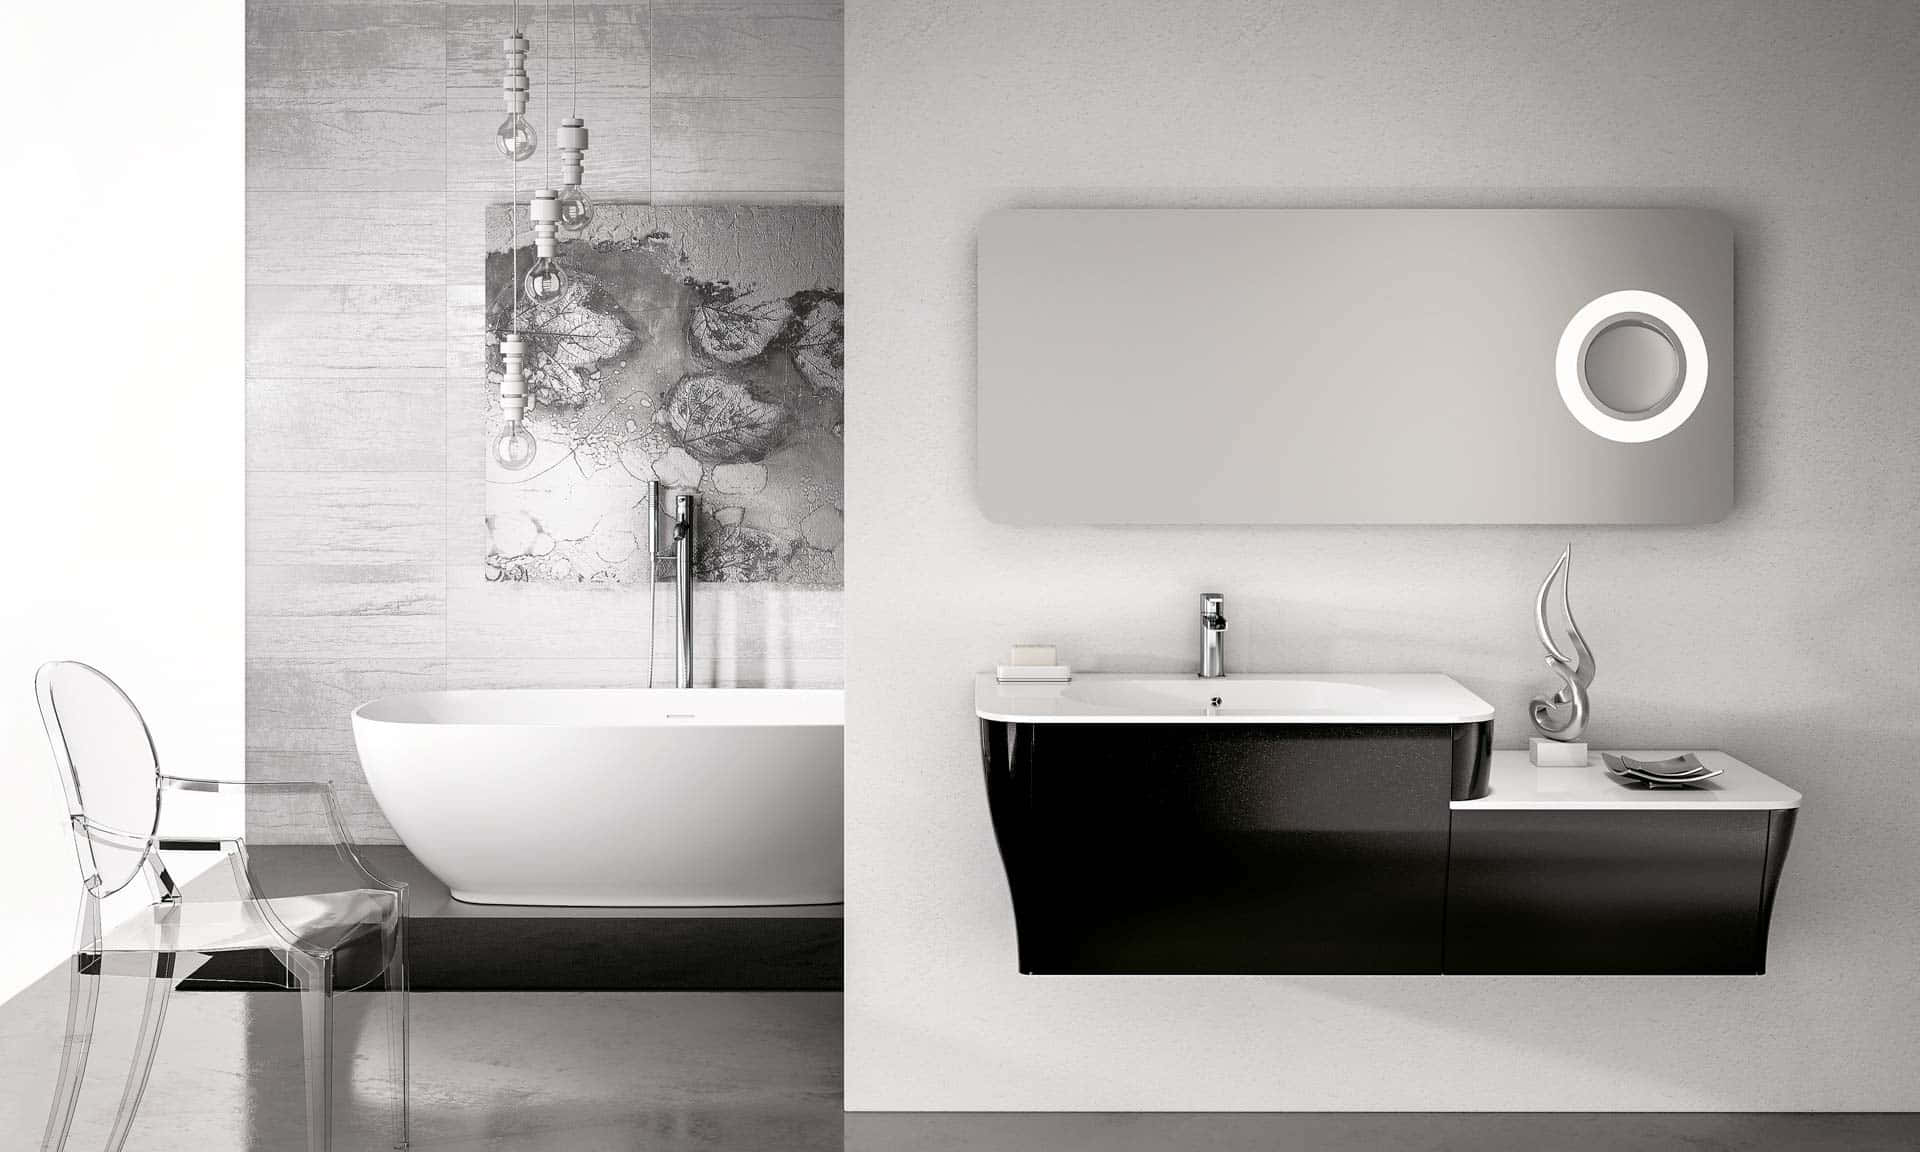 Refresh your bathroom with classic black and white design.